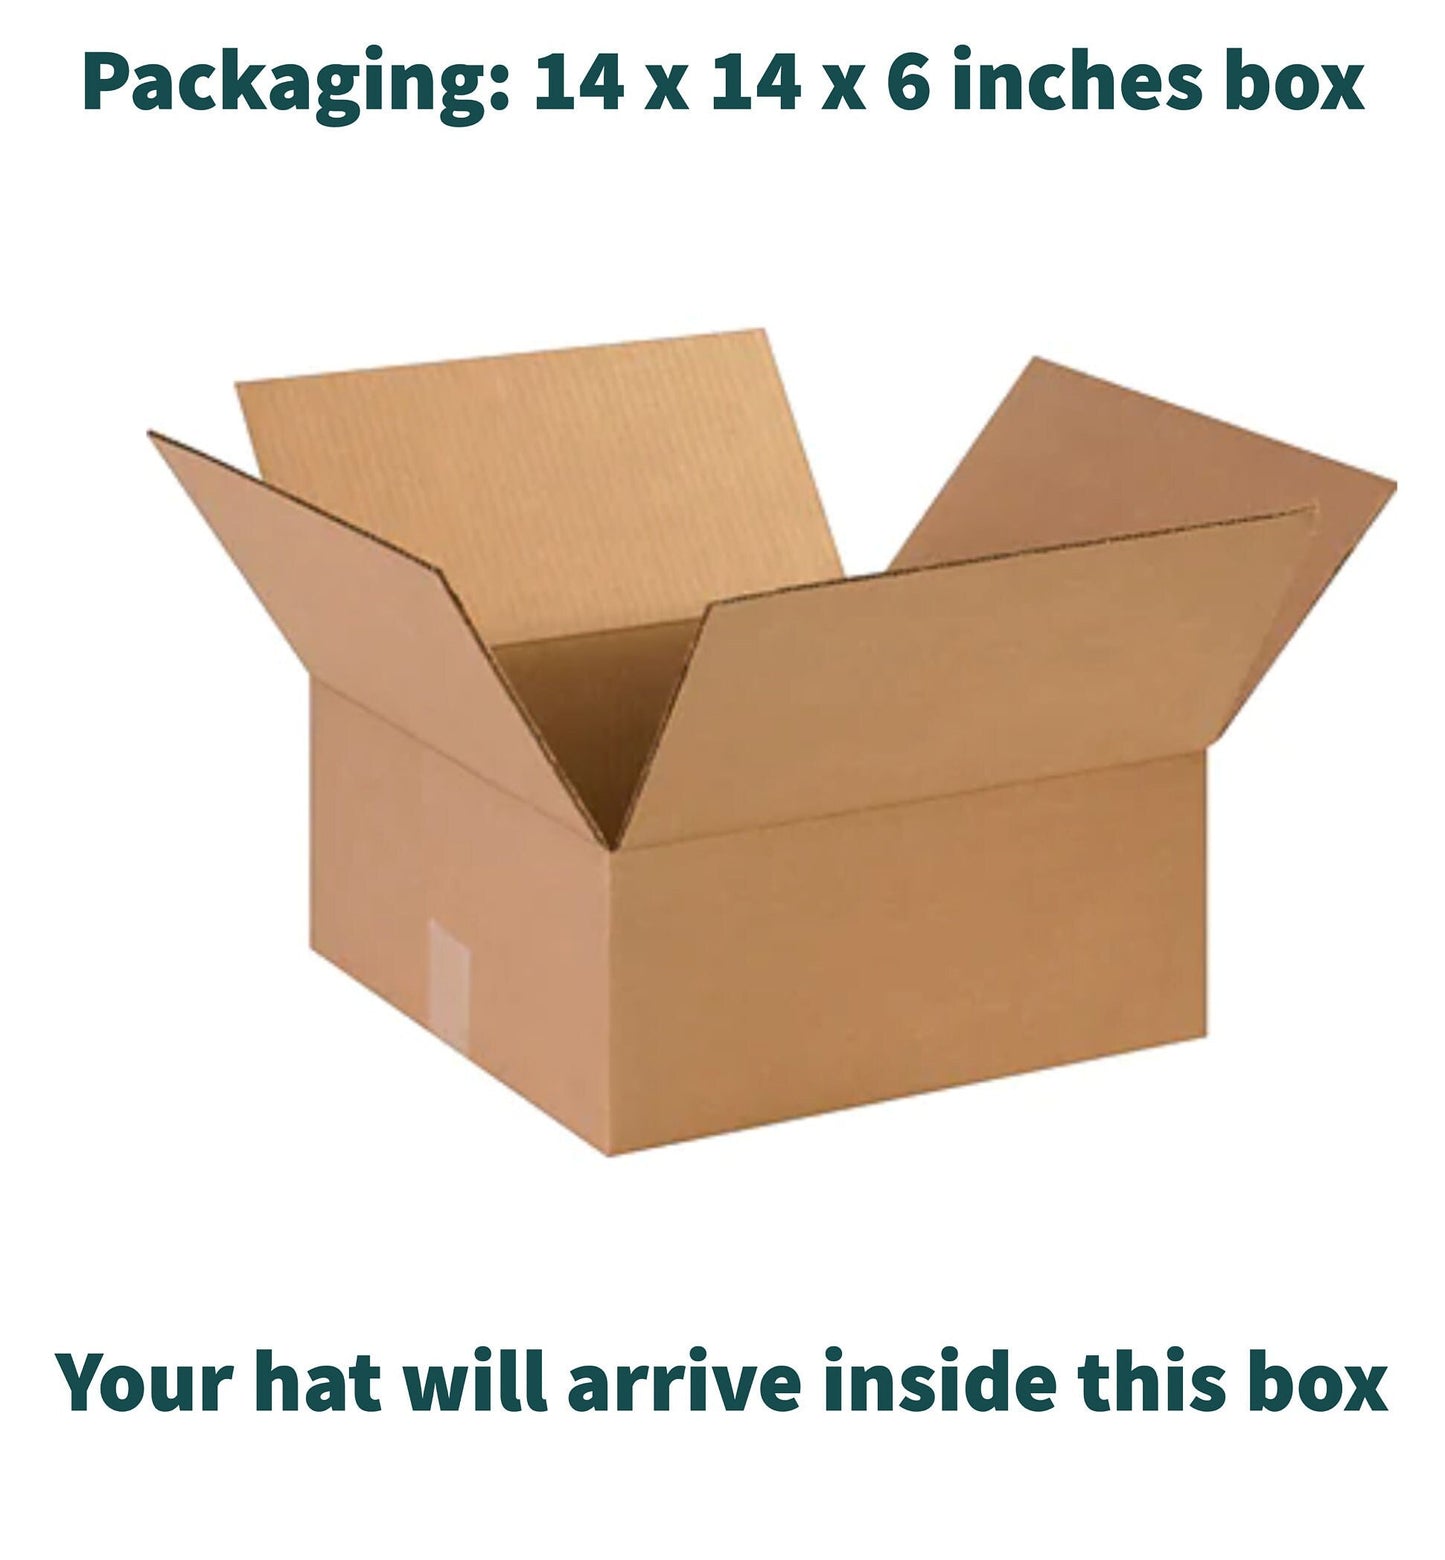 Packaging for hat 